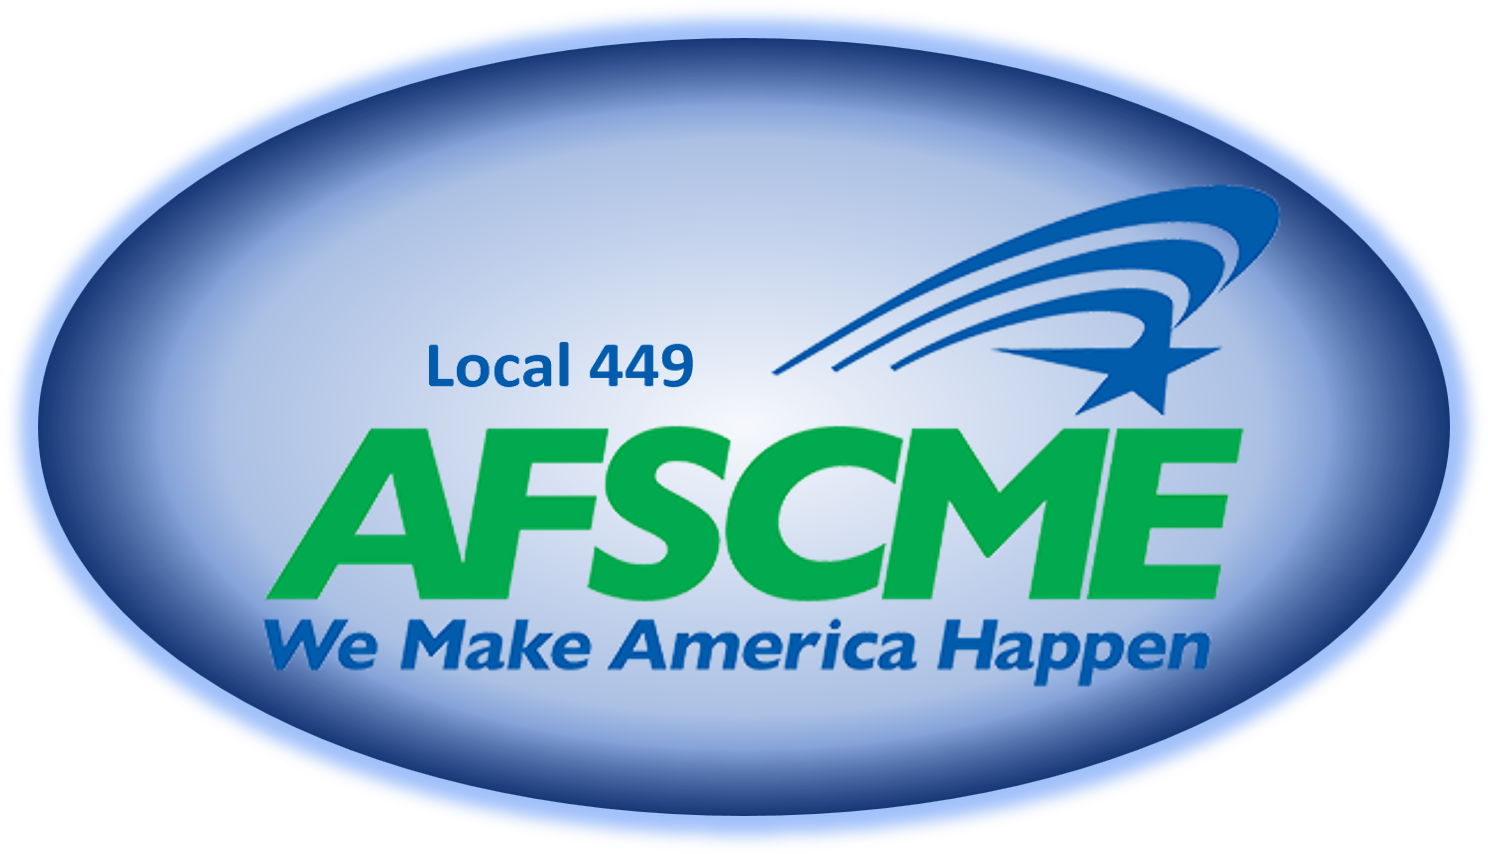 AFSCME Local 449